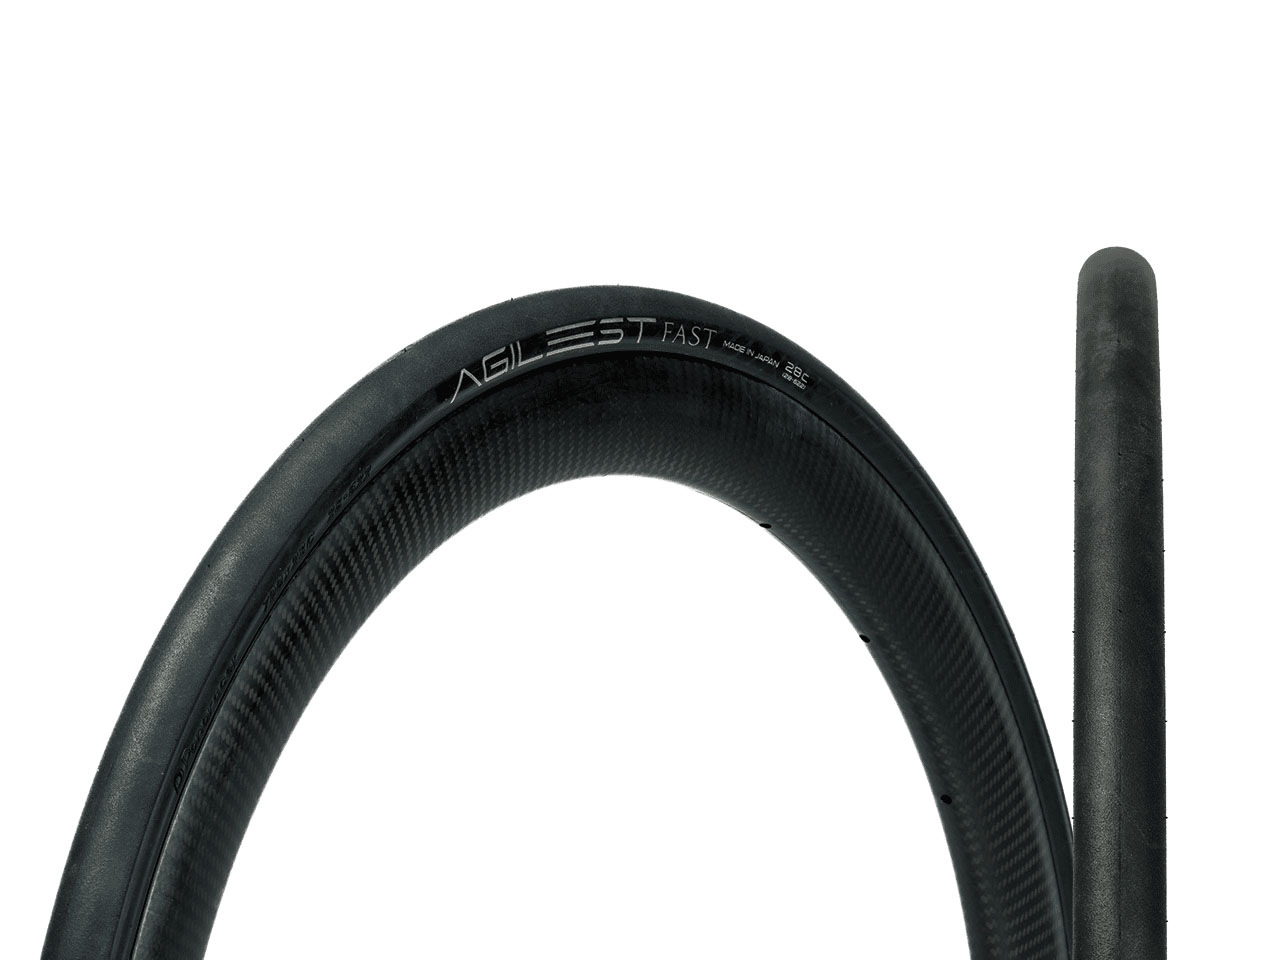 Panaracer Agilest Fast 700X25C 28C Road Tire *Made in Japan